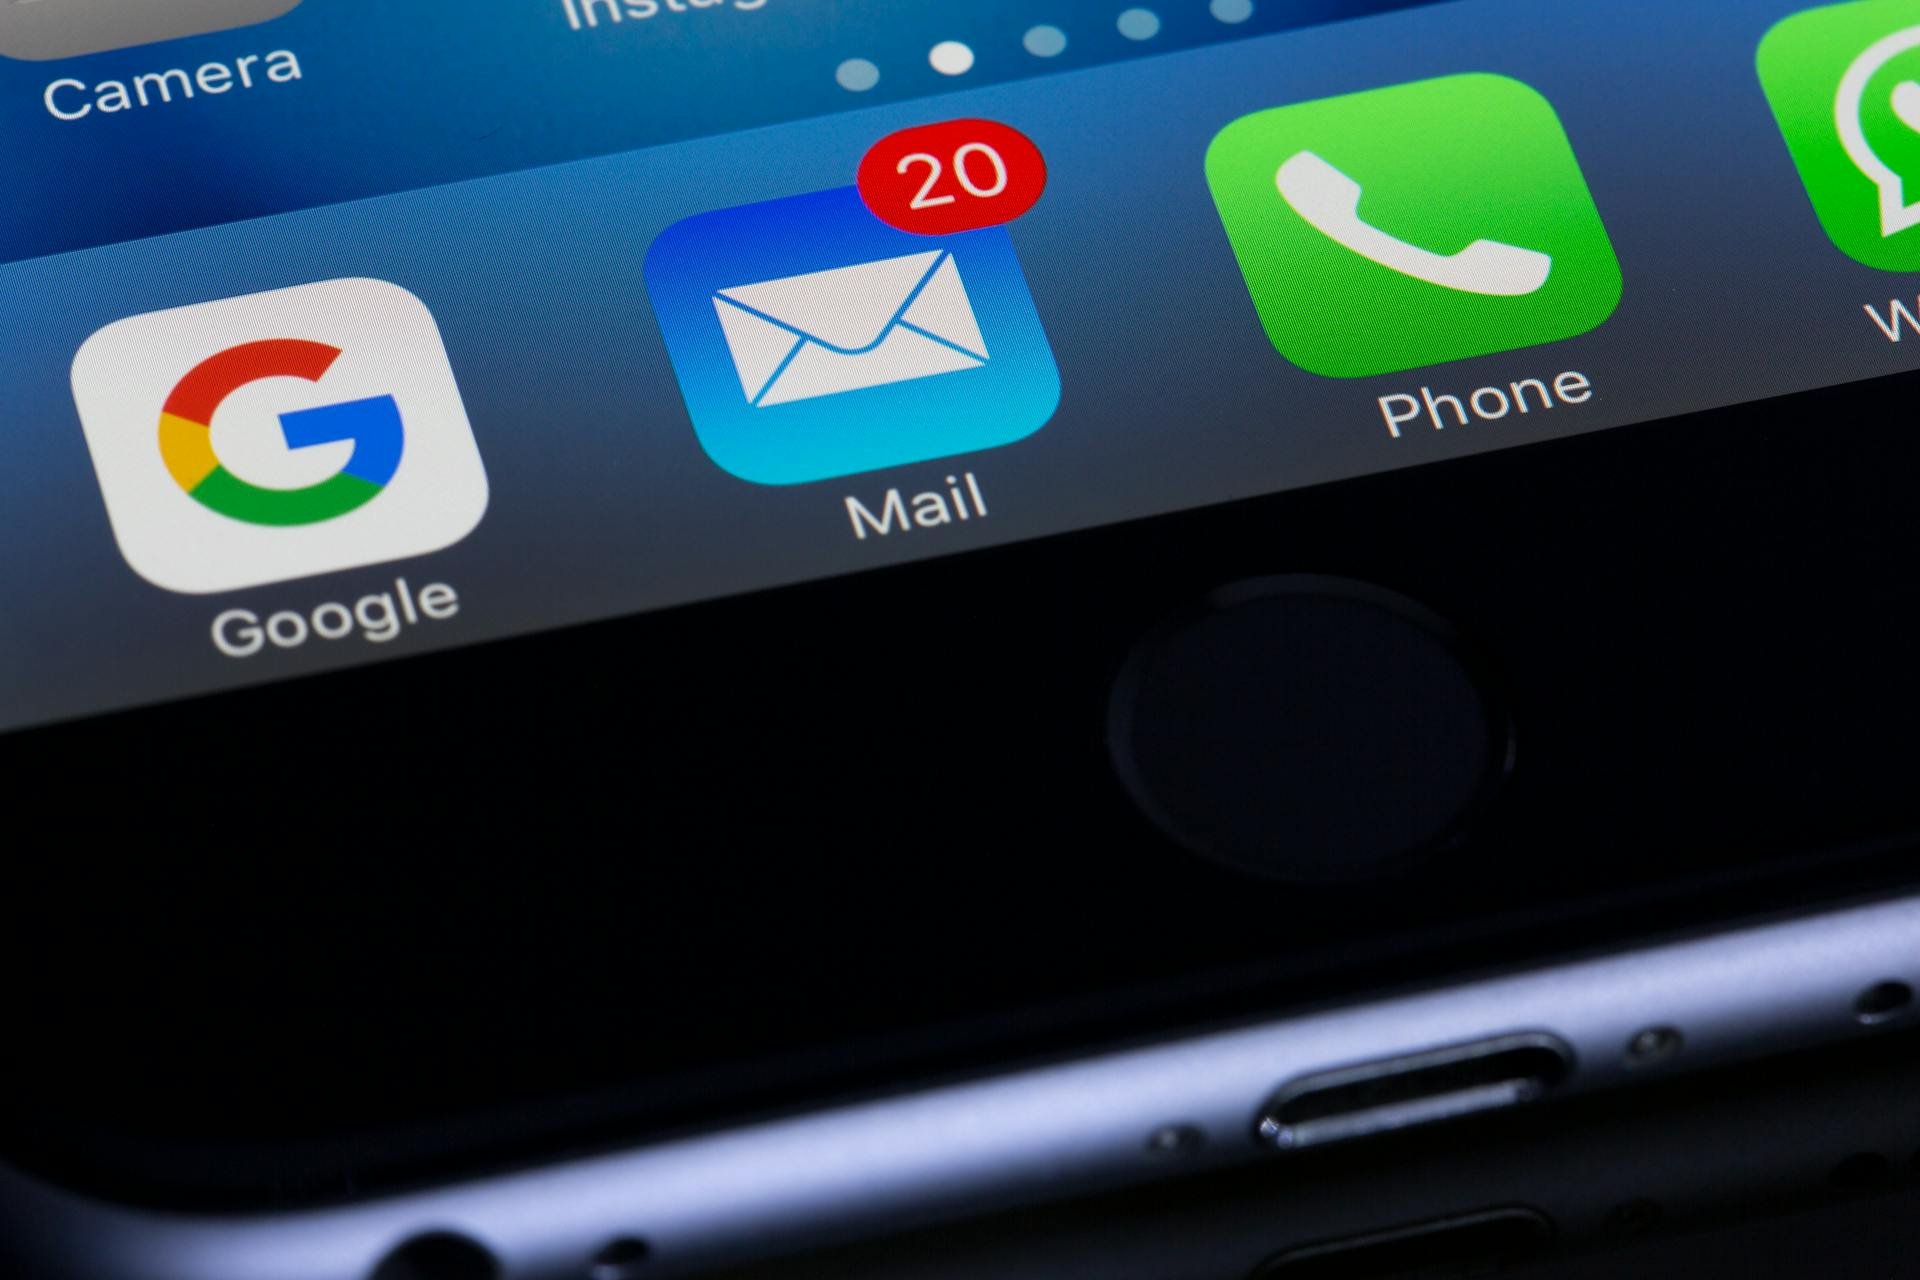 Smartphone screen showing app icons for Google, an email app with 20 new messages, and a phone app.